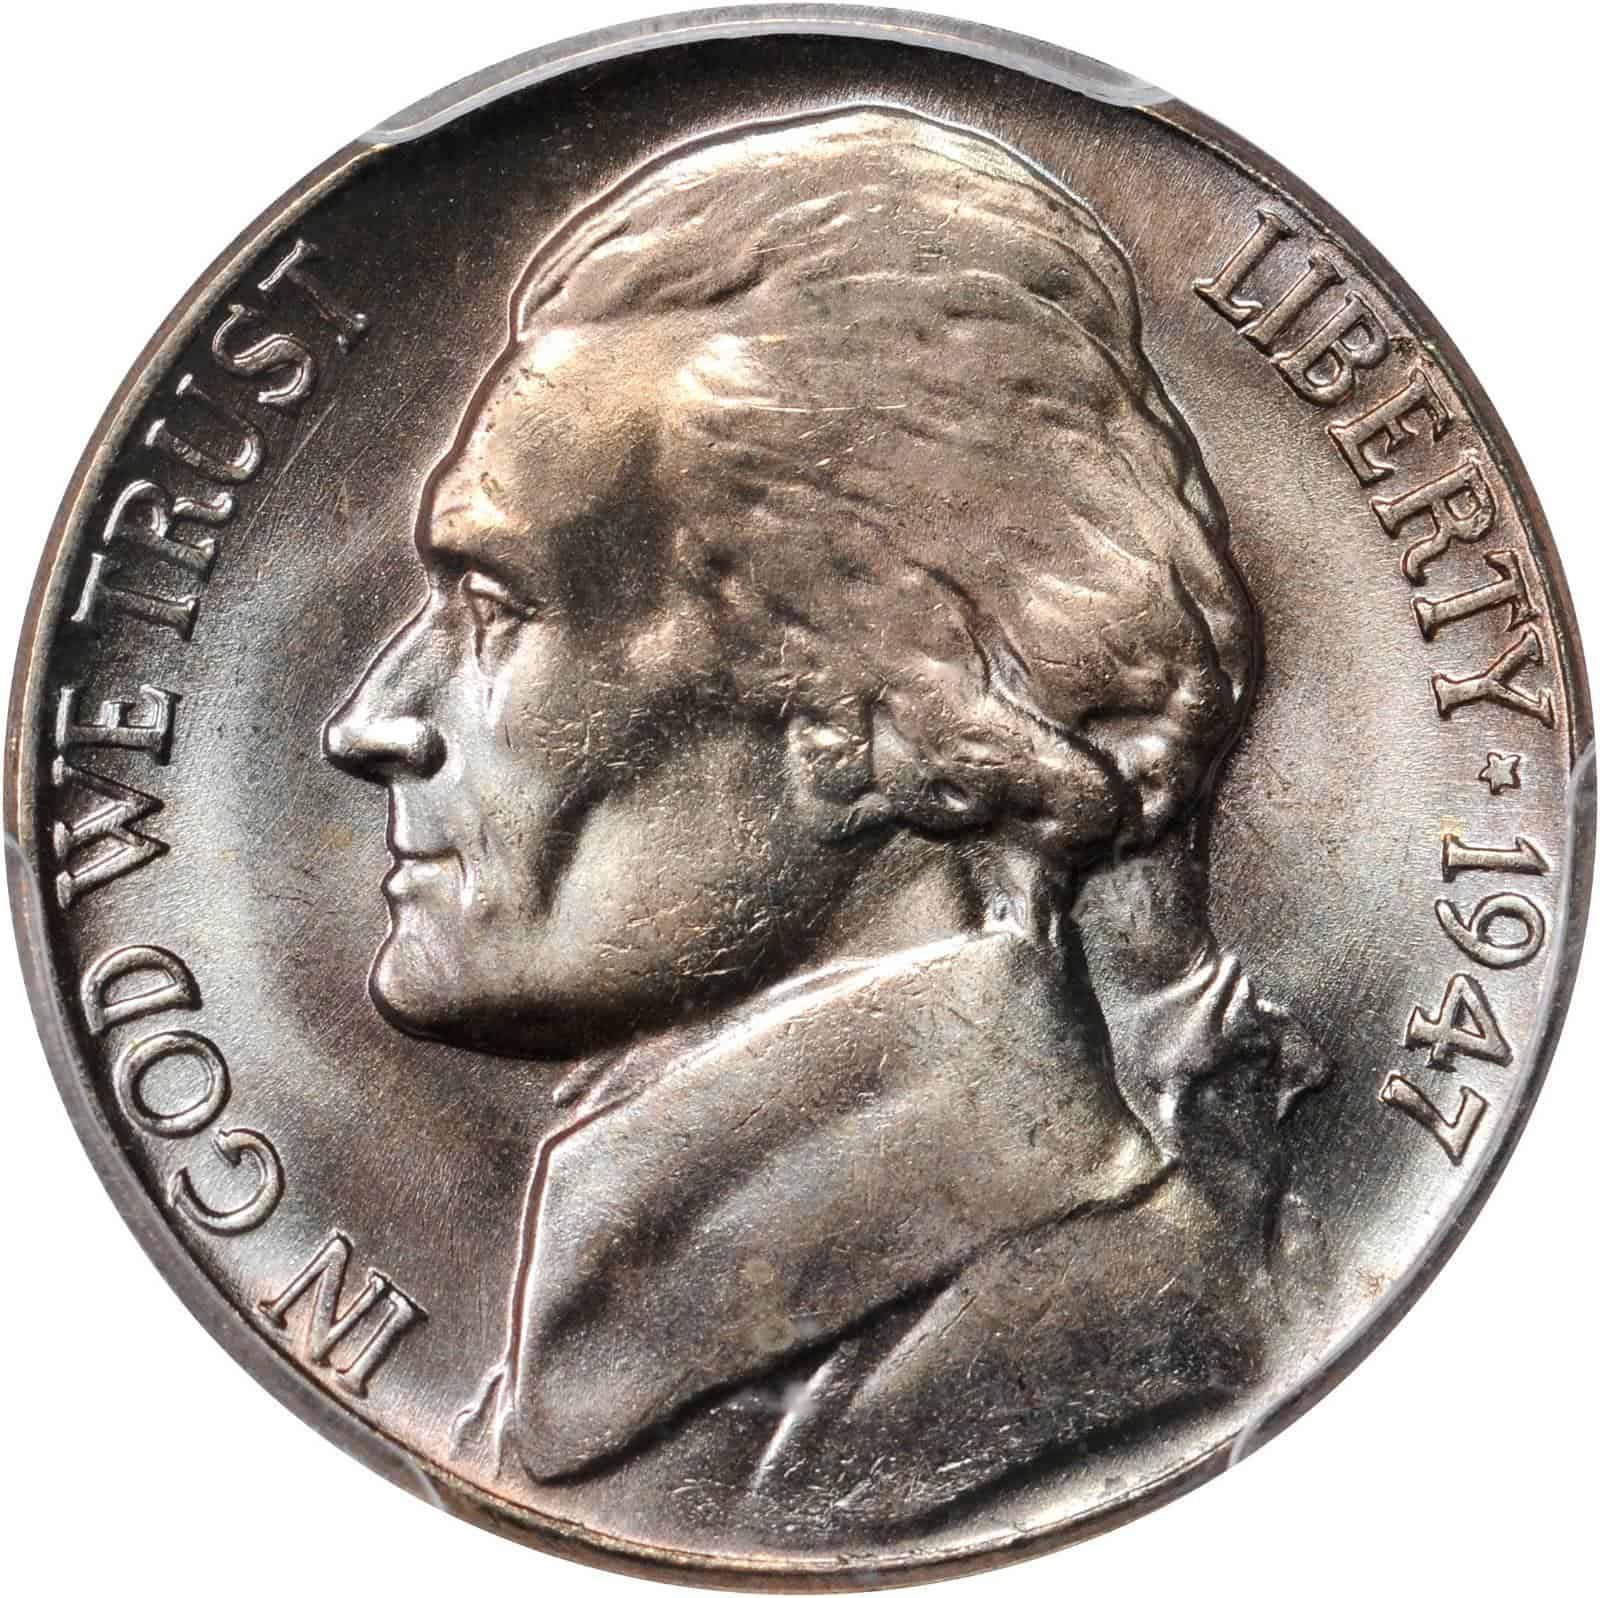 The Obverse of the 1947 Nickel